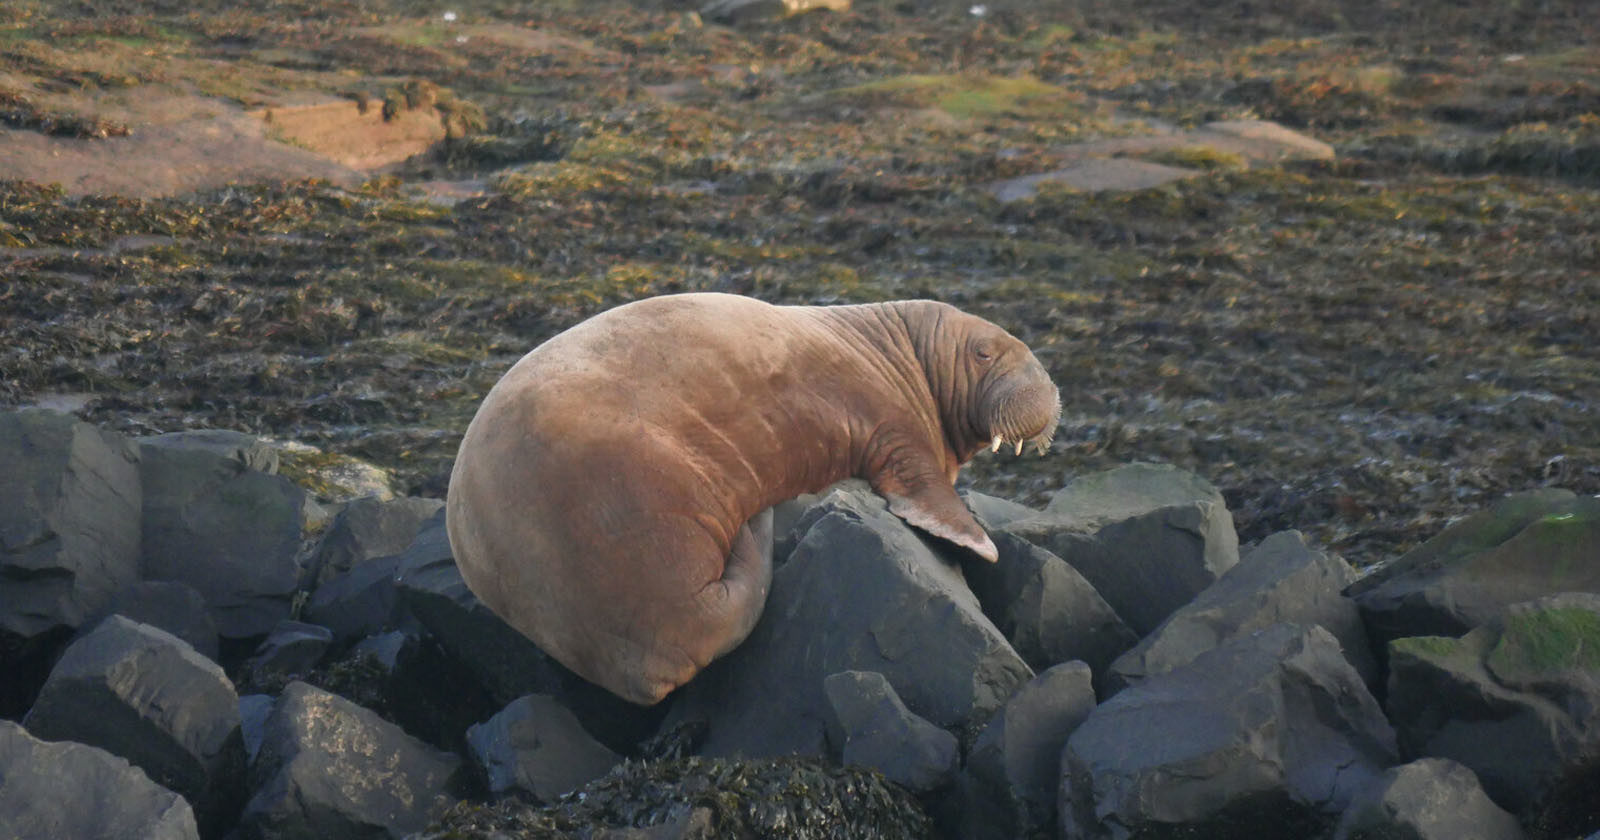  photographer who befriended freya walrus outraged her 